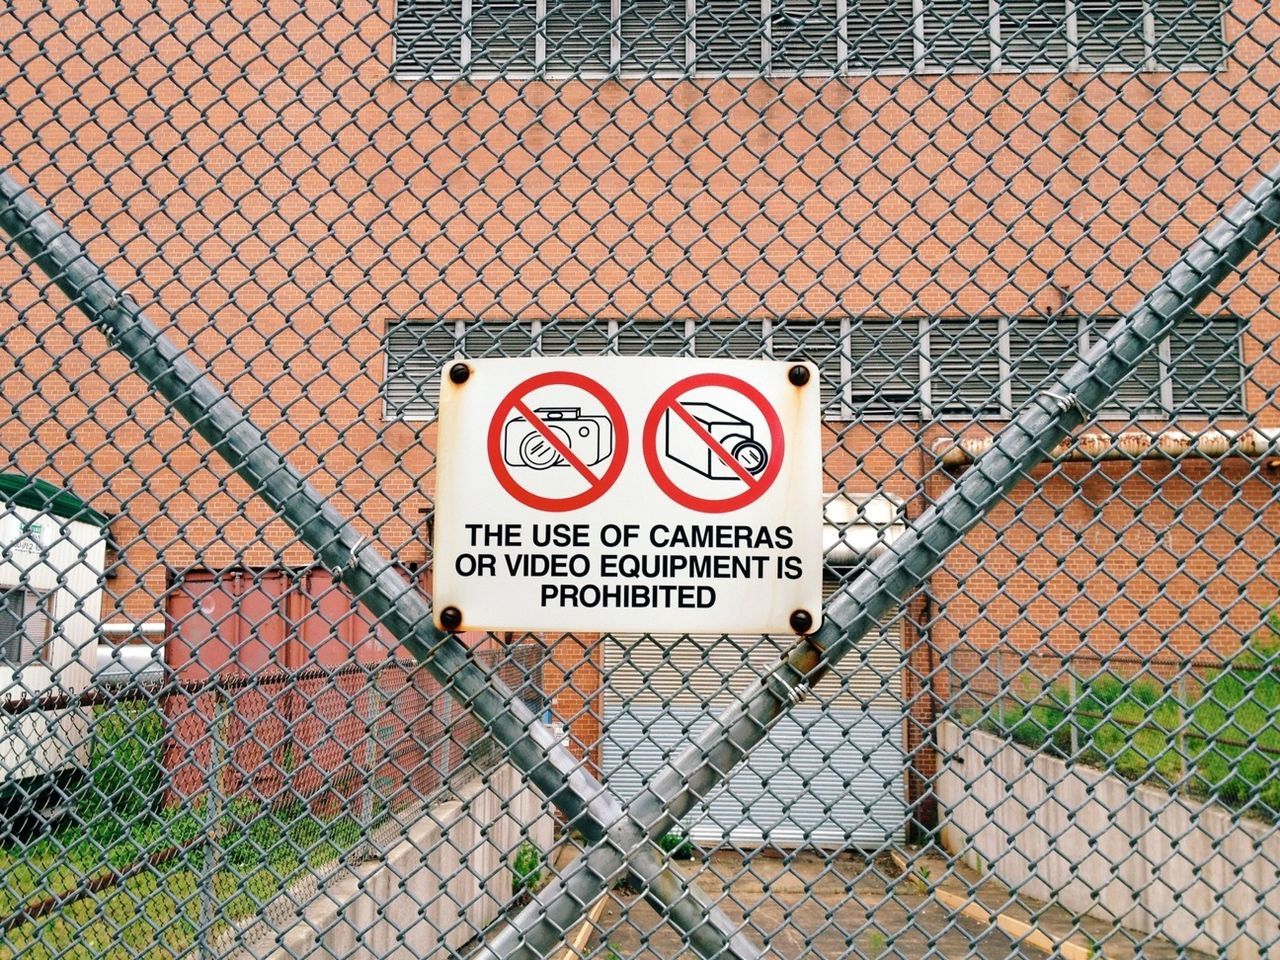 Close-up prohibition sign on wire mesh fence